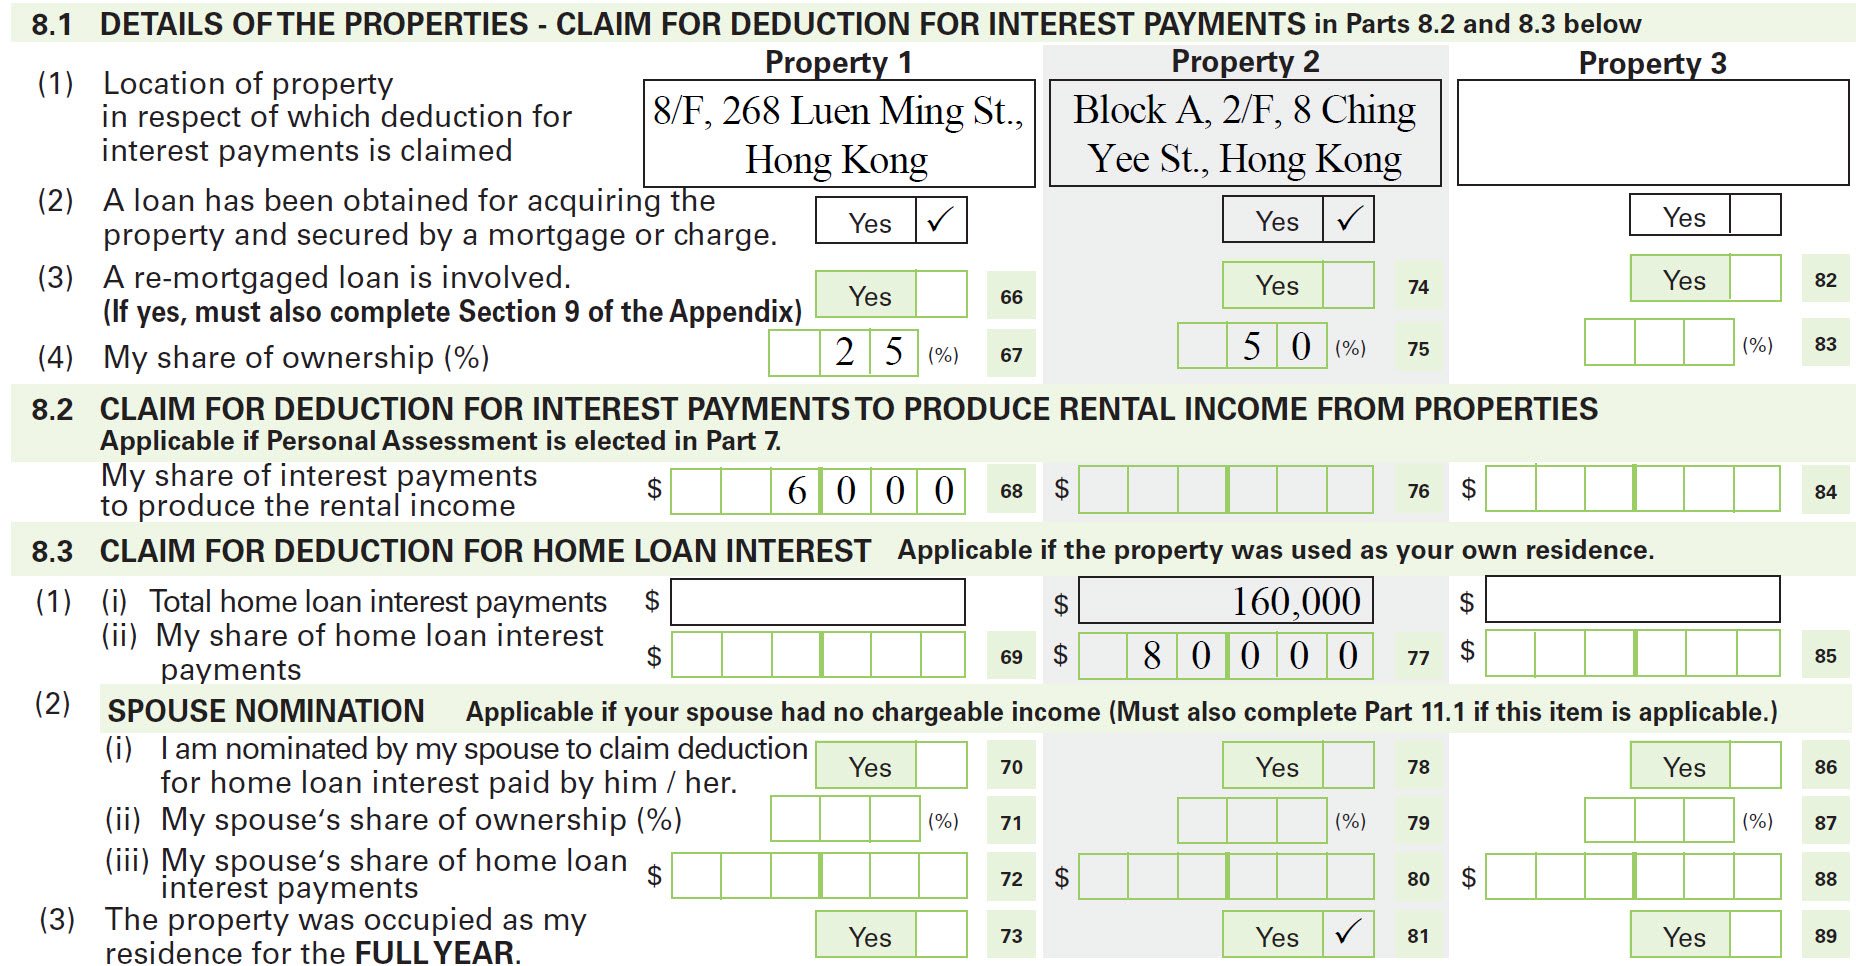 corporate-tax-rate-benefits-in-hong-kong-get-started-hk